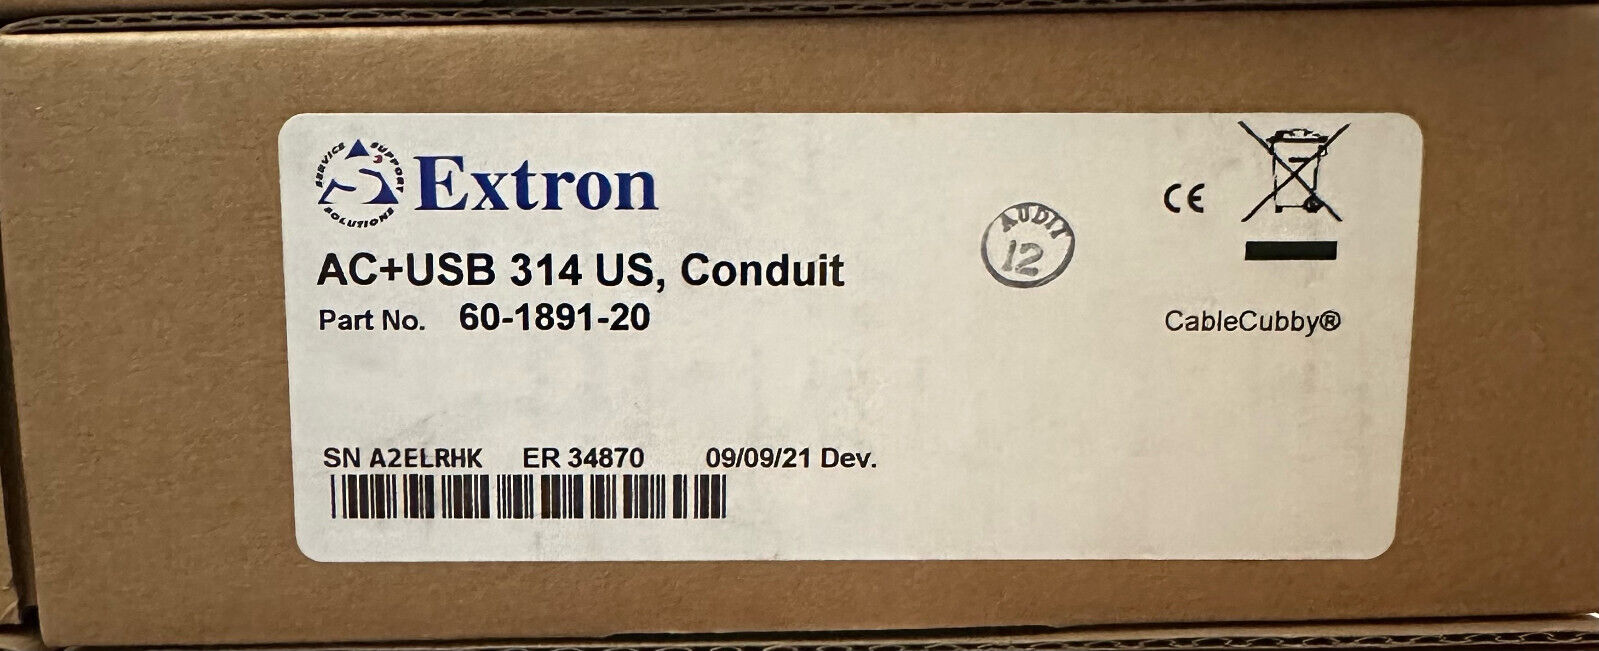 Extron AC+USB 314 US, Conduit, 300 Series PWR Module for Cable Cubby 60-1891-20